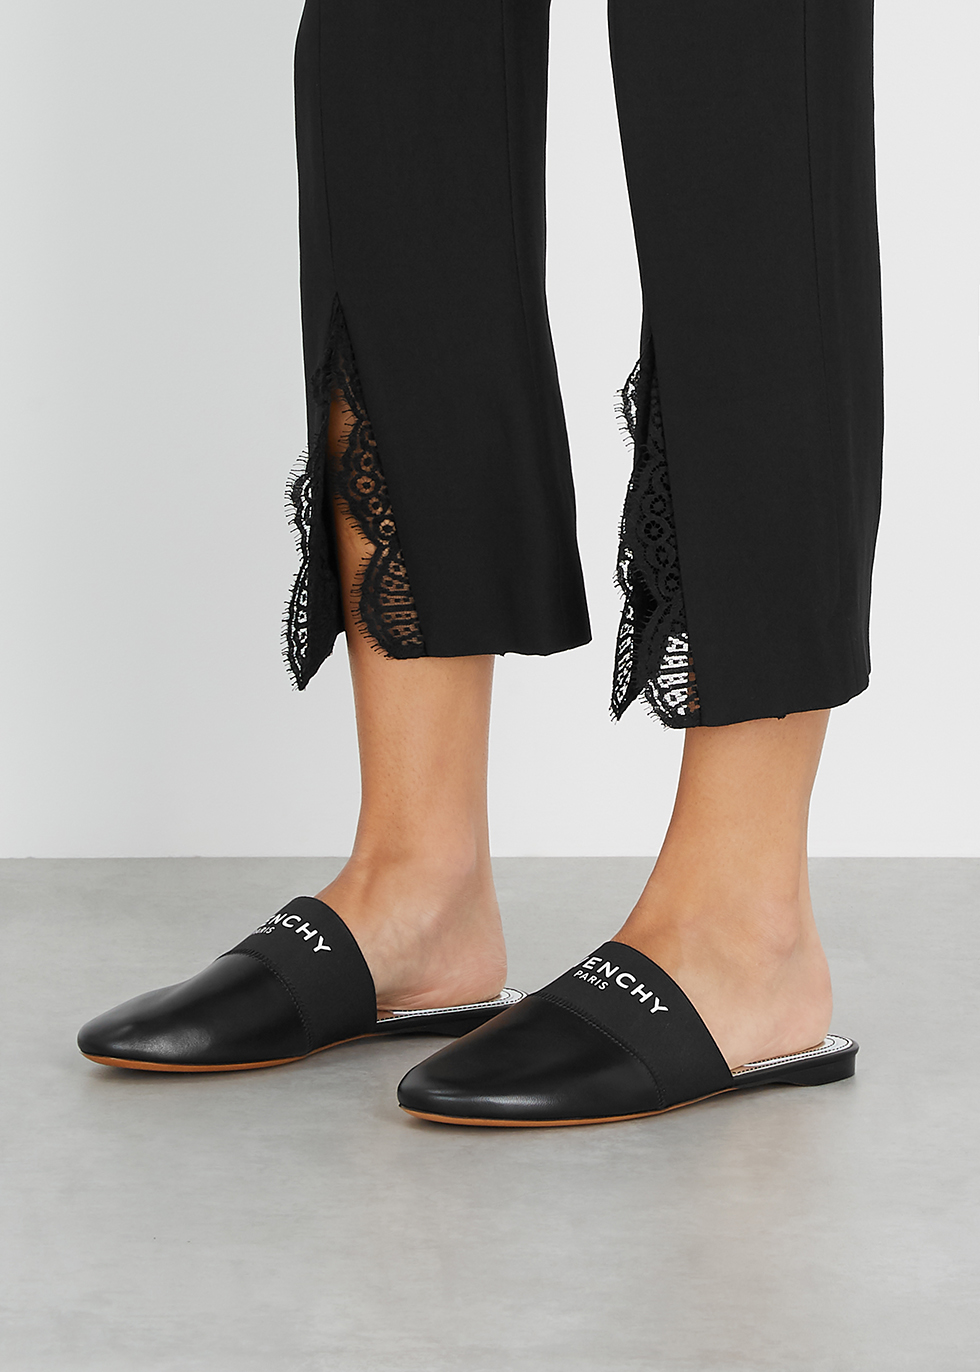 givenchy bedford mule